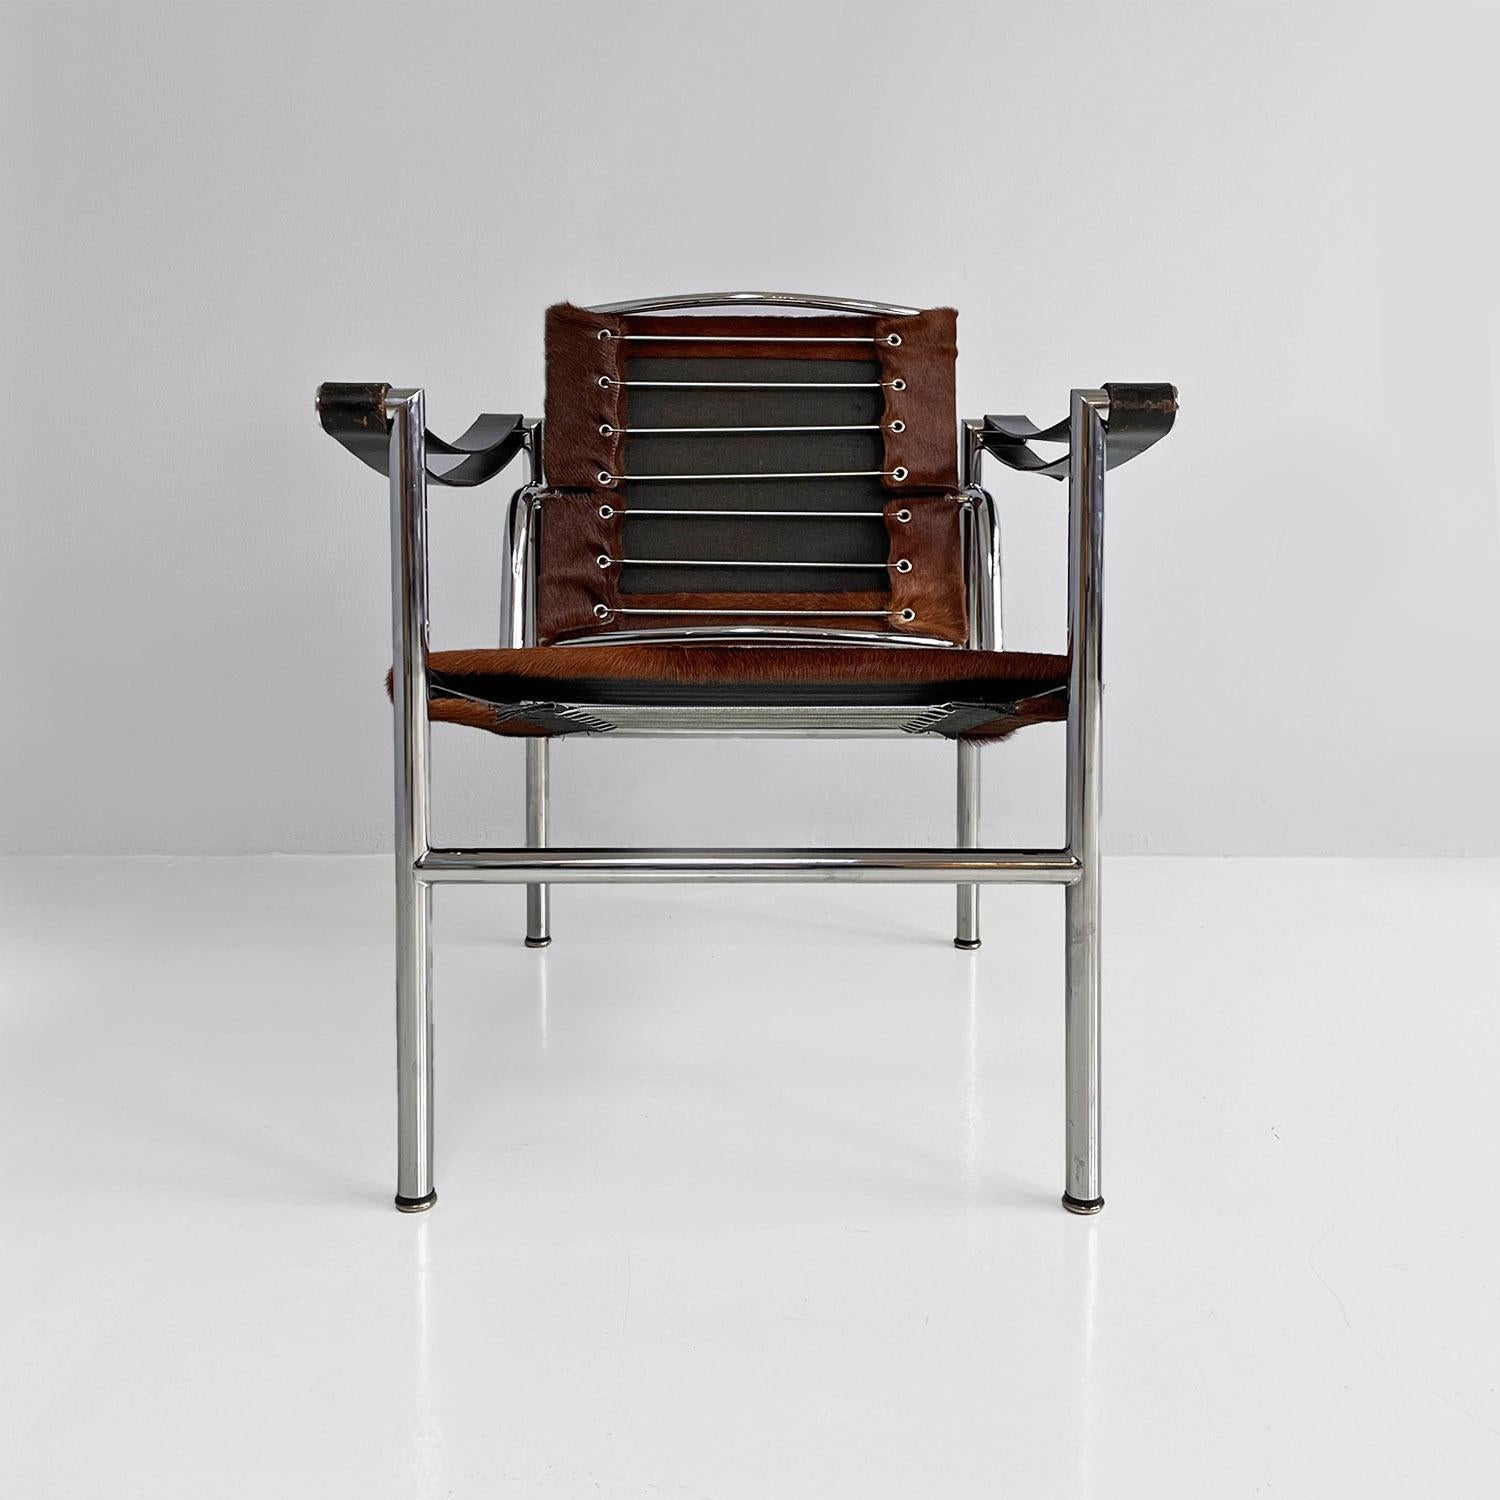 Steel Italian modern LC1 armchair, Le Corbusier, Jeanneret and Perriand, Cassina 1960s For Sale